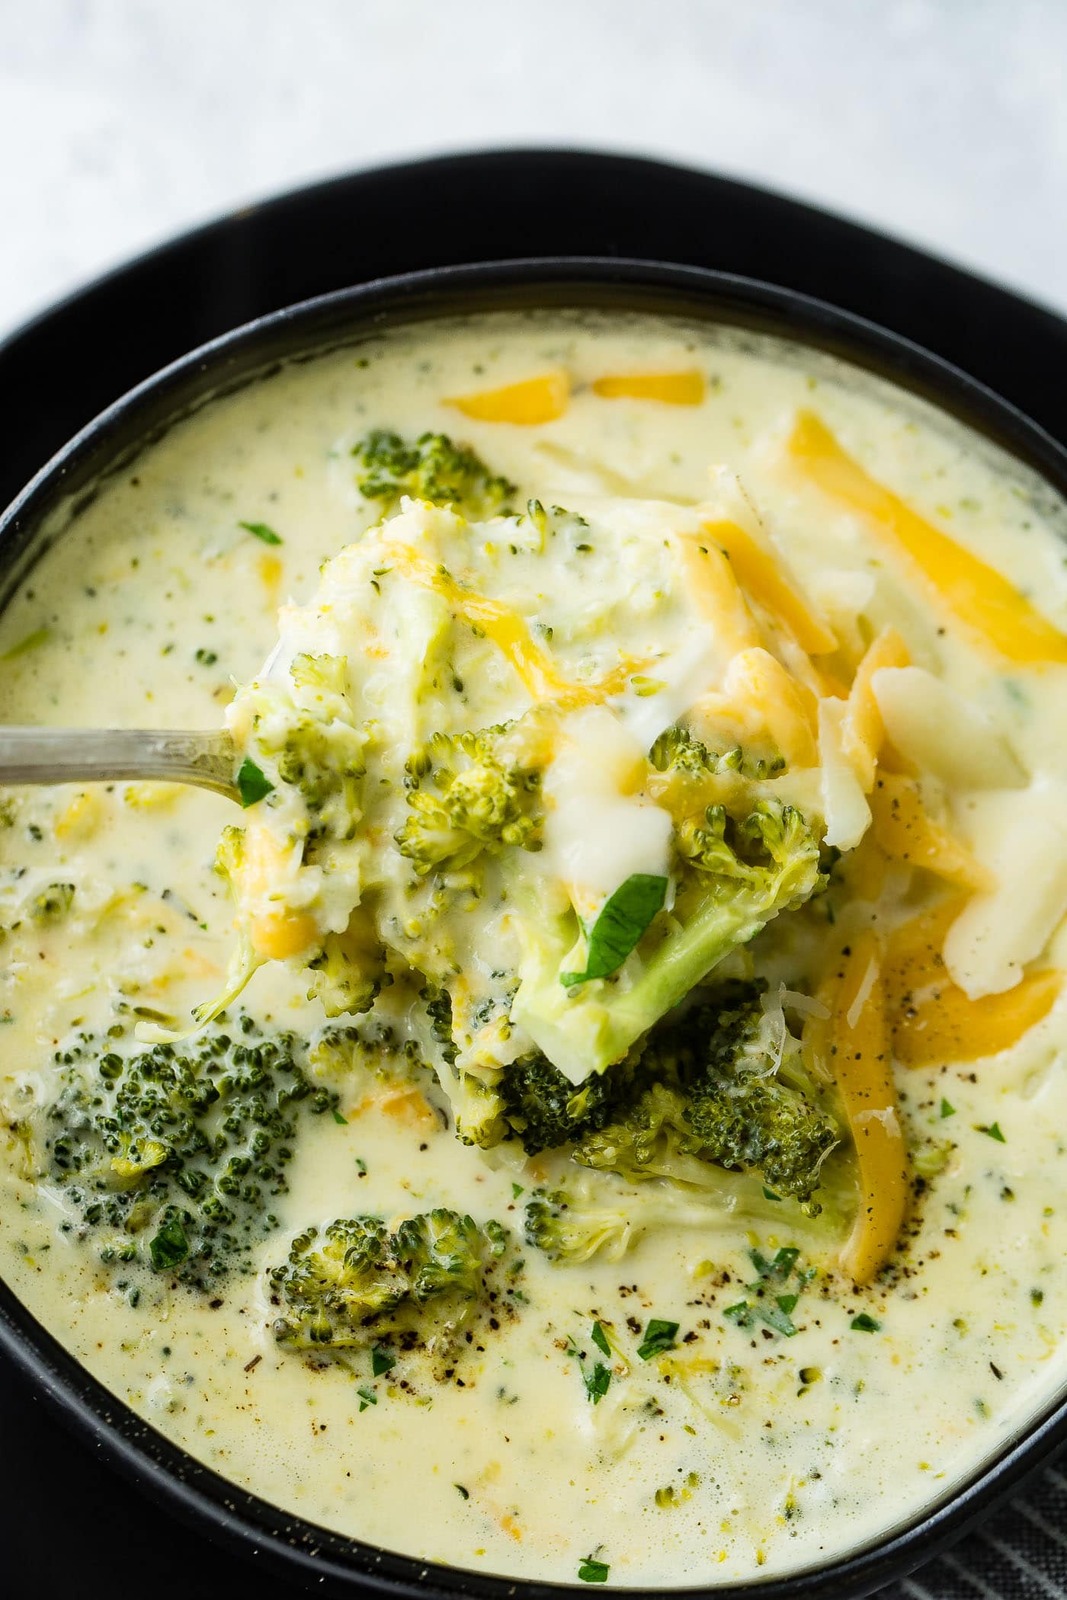 slow-cooker-broccoli-cheese-soup-recipe-6.jpg